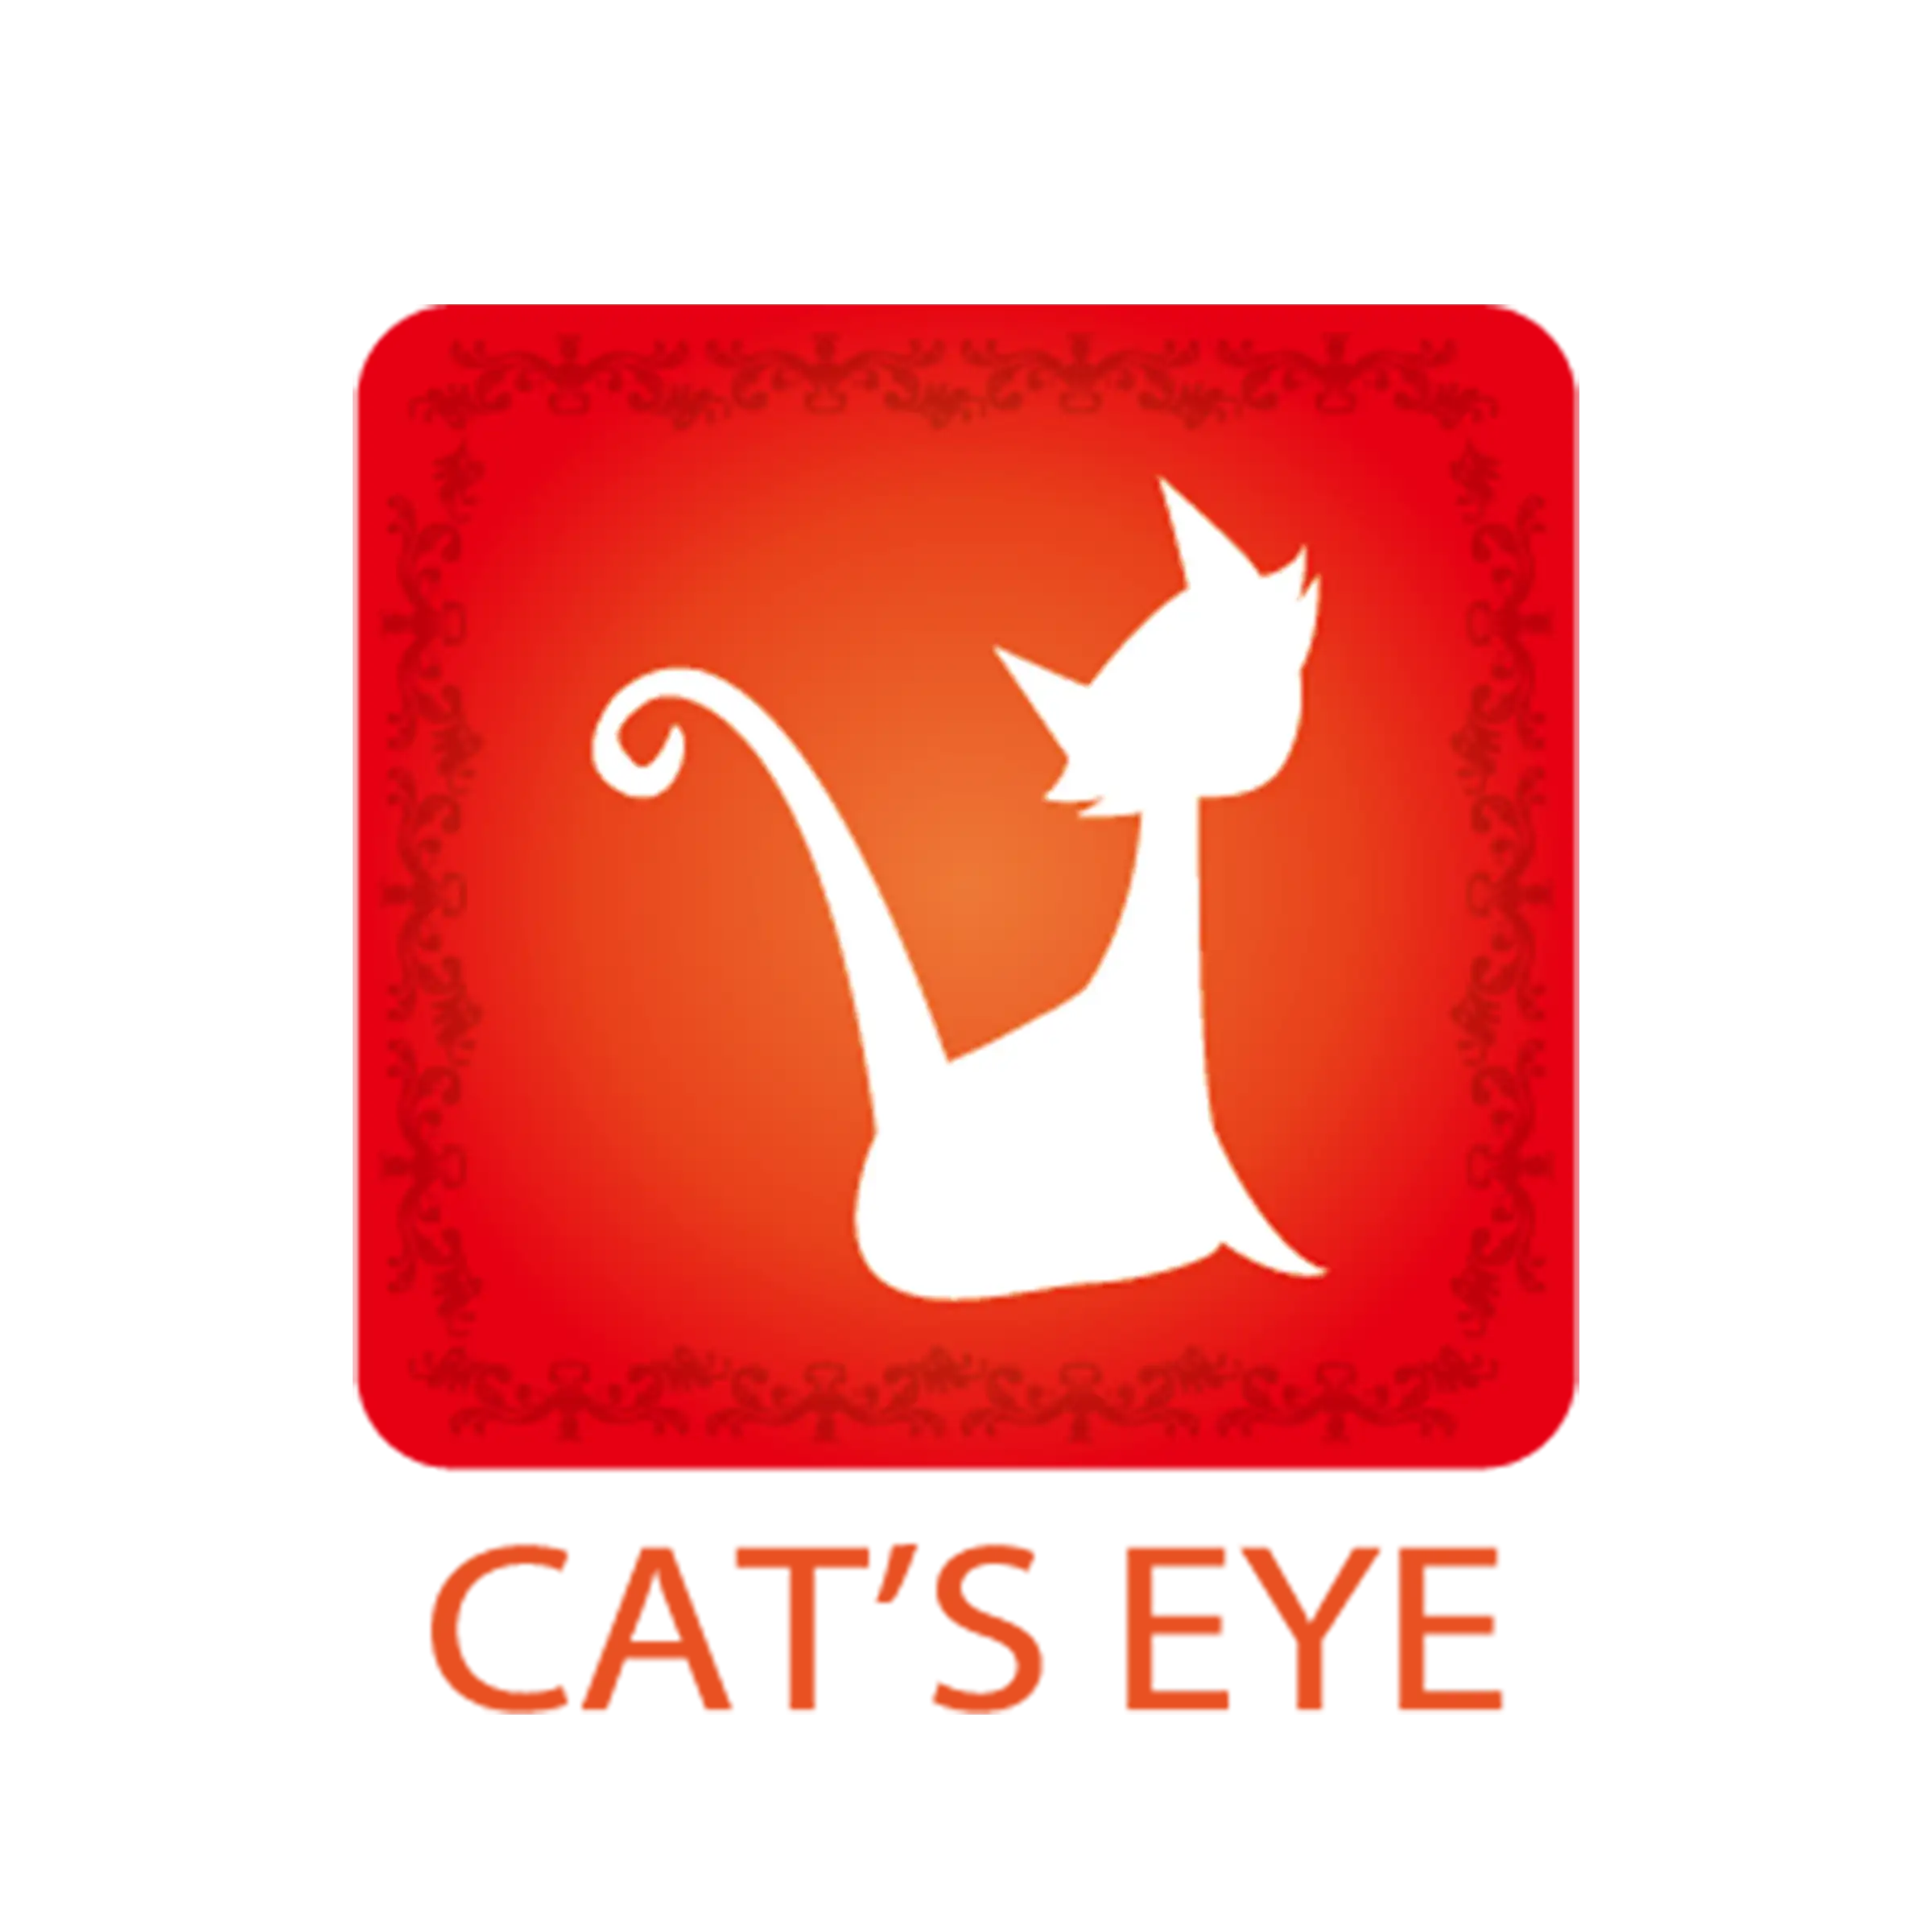 cats eye 1679640135yH8OW